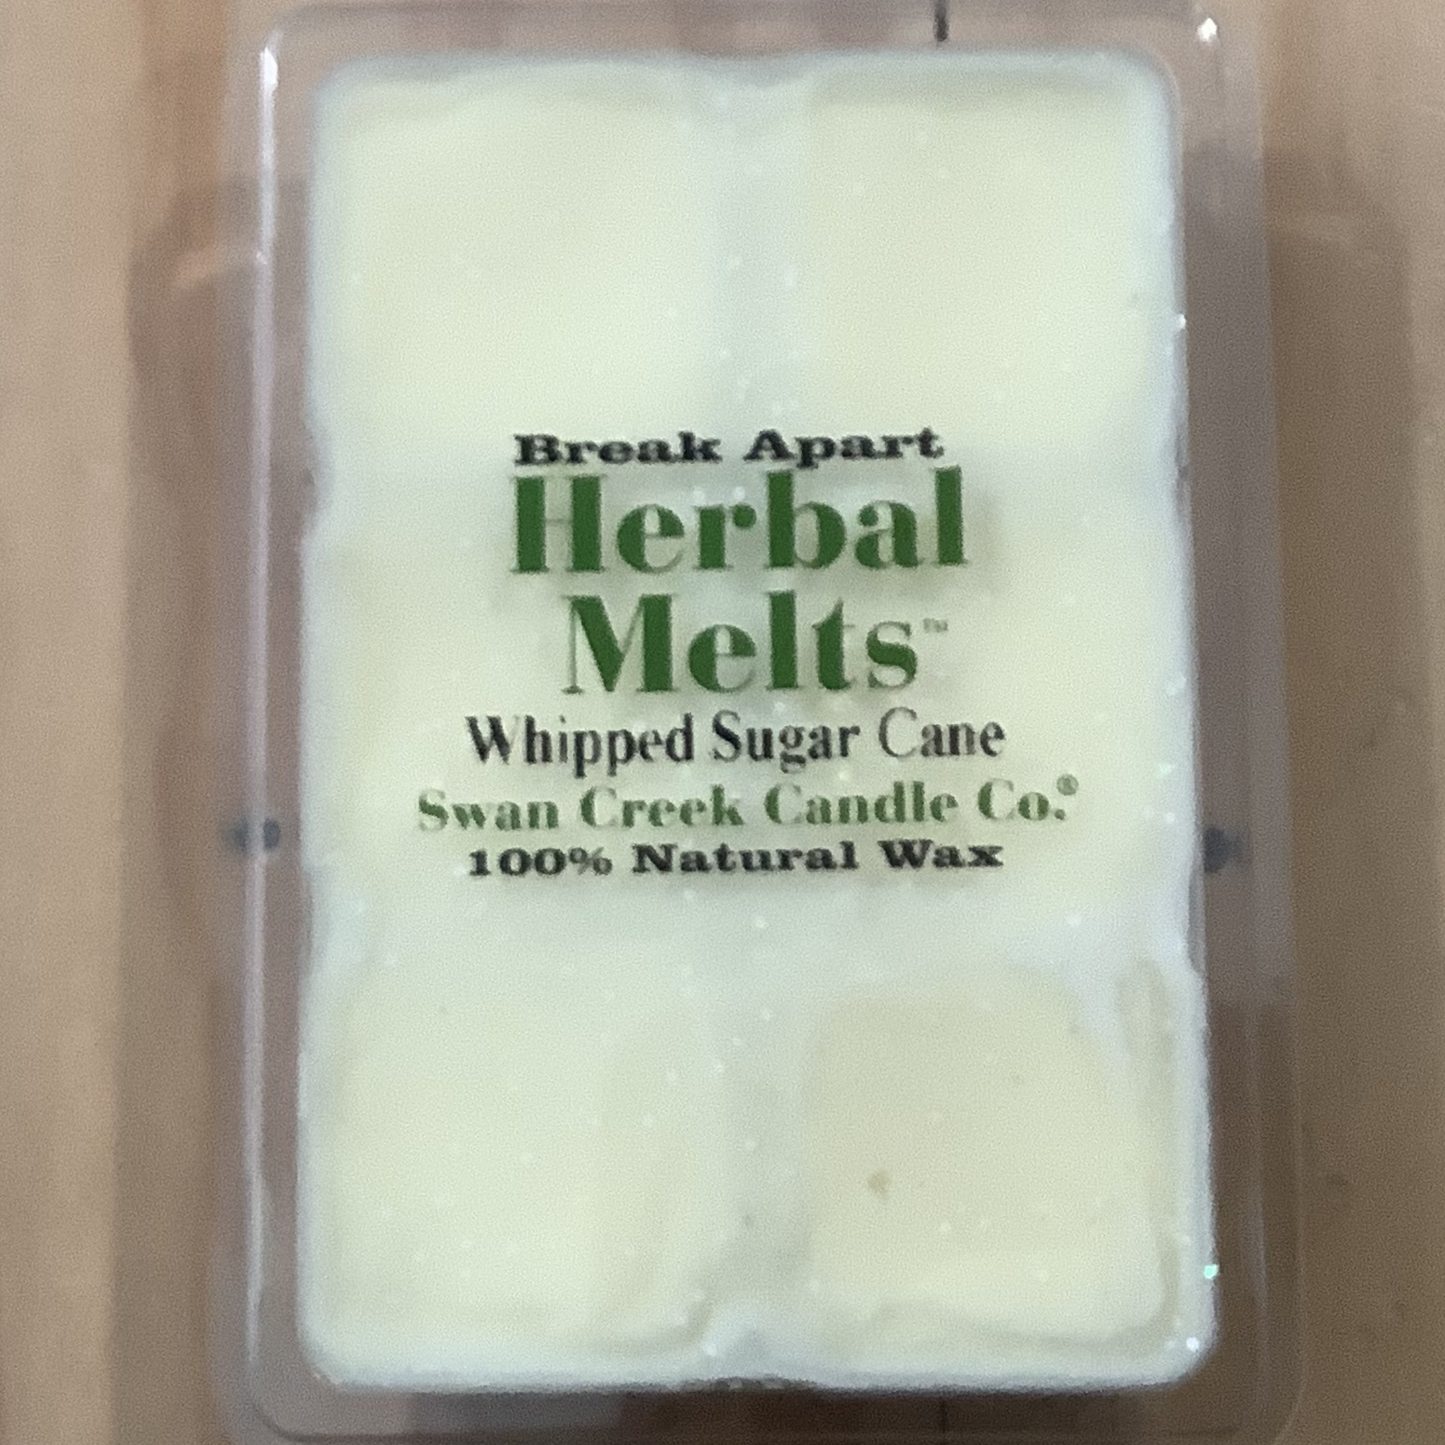 Whipped Sugar Cane Herbal Melts